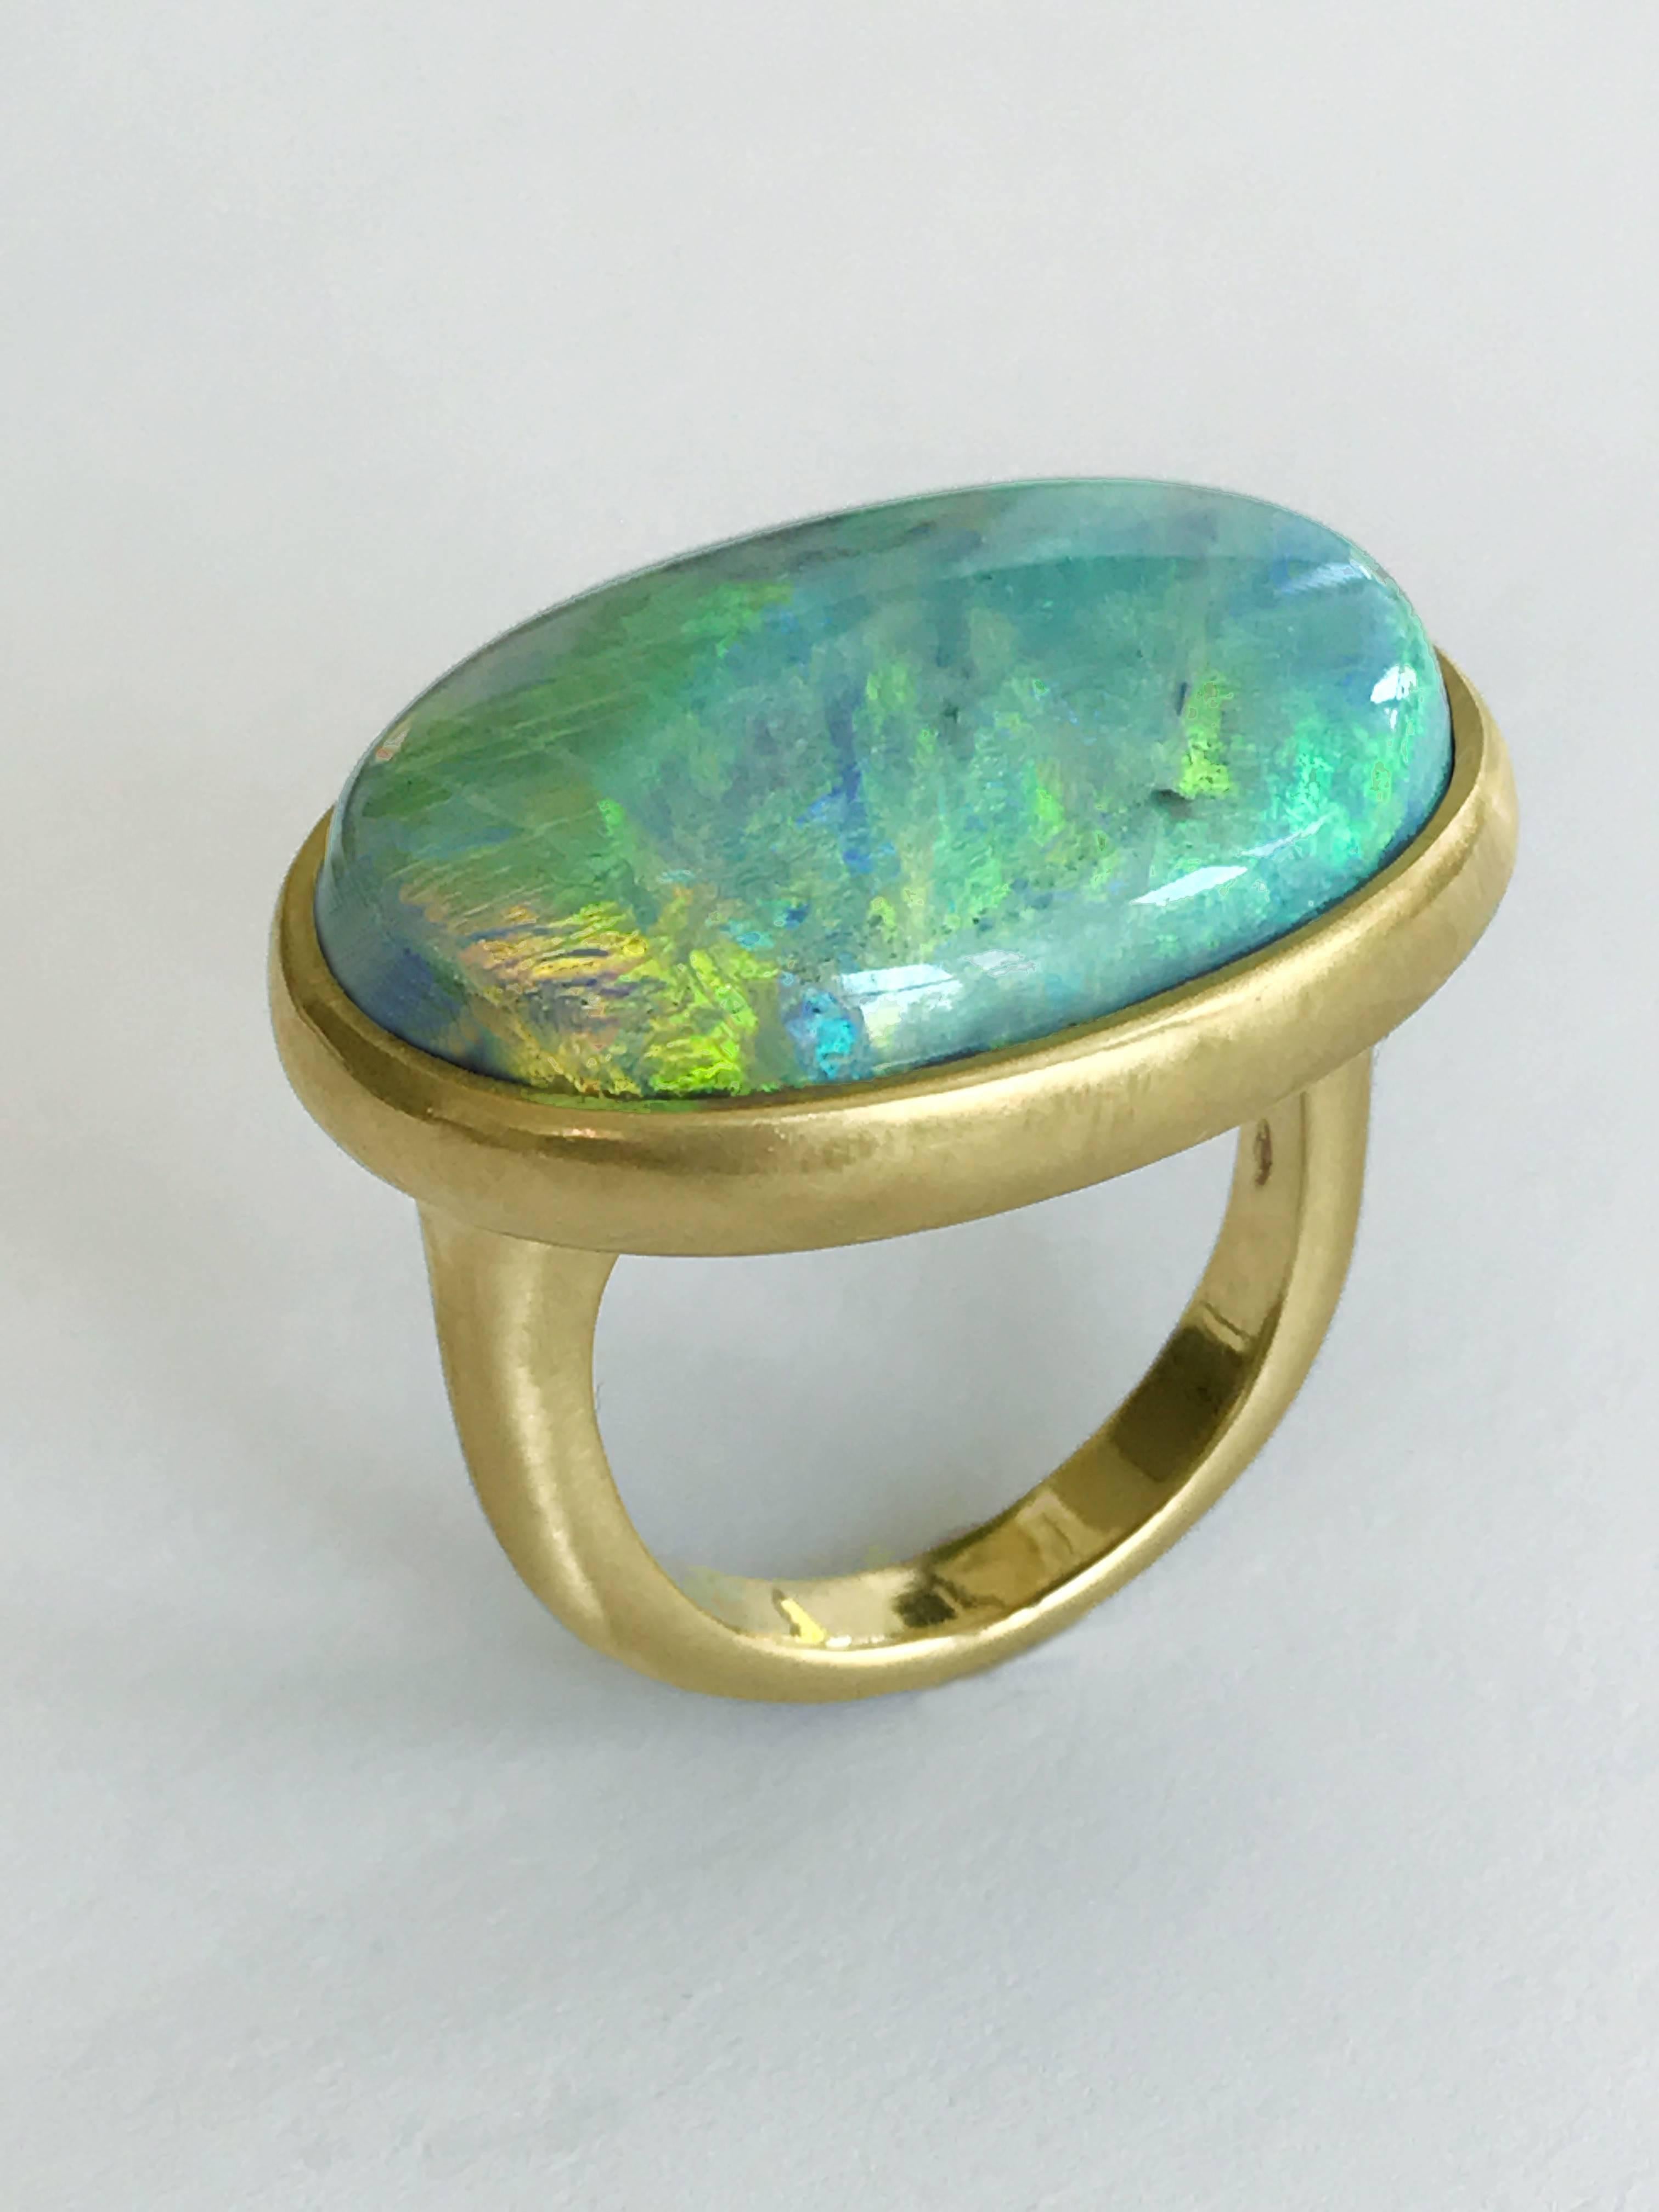 Dalben design One of a kind 18k yellow gold matte finishing ring with a 20,37 carat oval cabochon bezel-set magnificent Lightning Ridge - NSW - Australian Opal. 
This Australian Bouder Opal have wonderful light green and light blue reflex . Ring